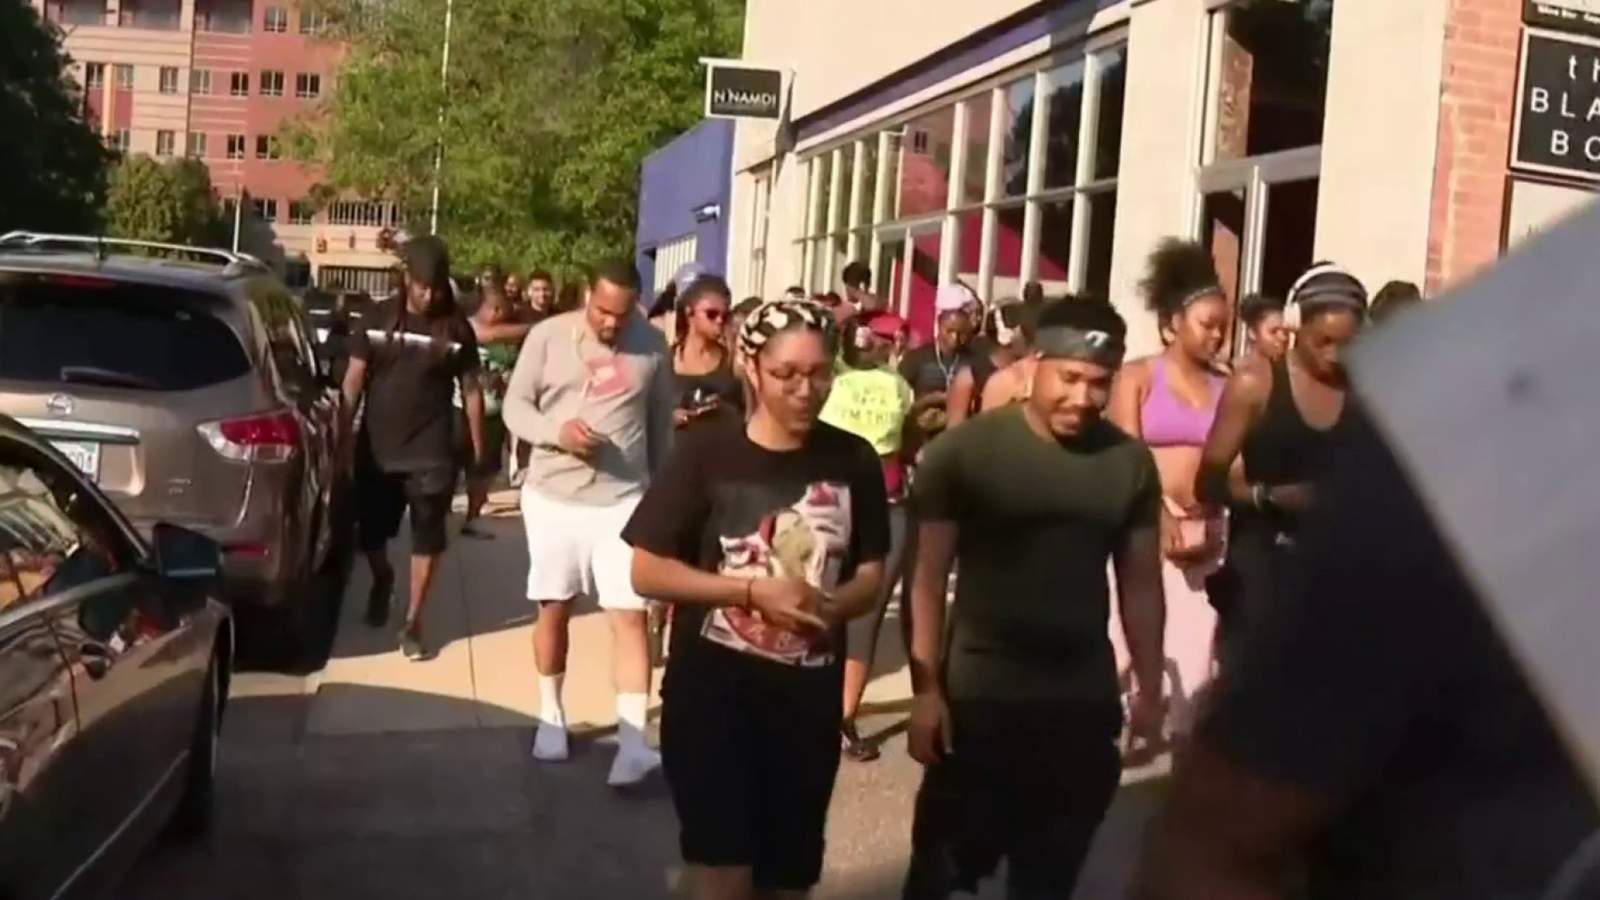 WeRun313 running club aims to connect with Black runners in Detroit, gives away running shoes